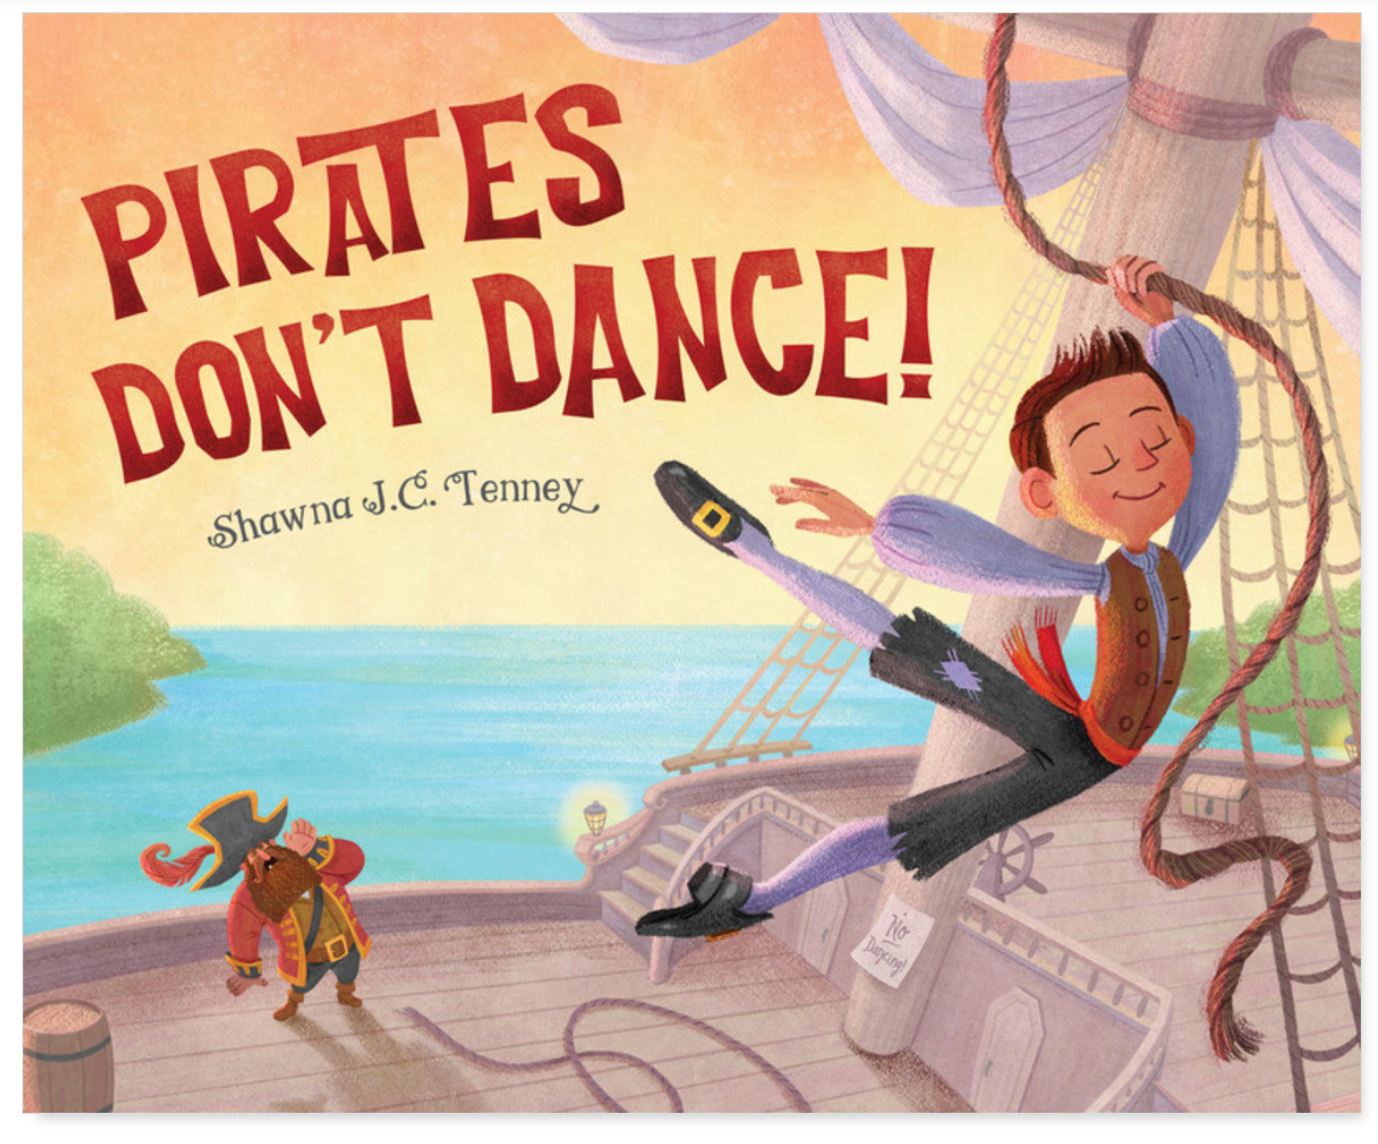 PIRATE'S DON'T DANCE